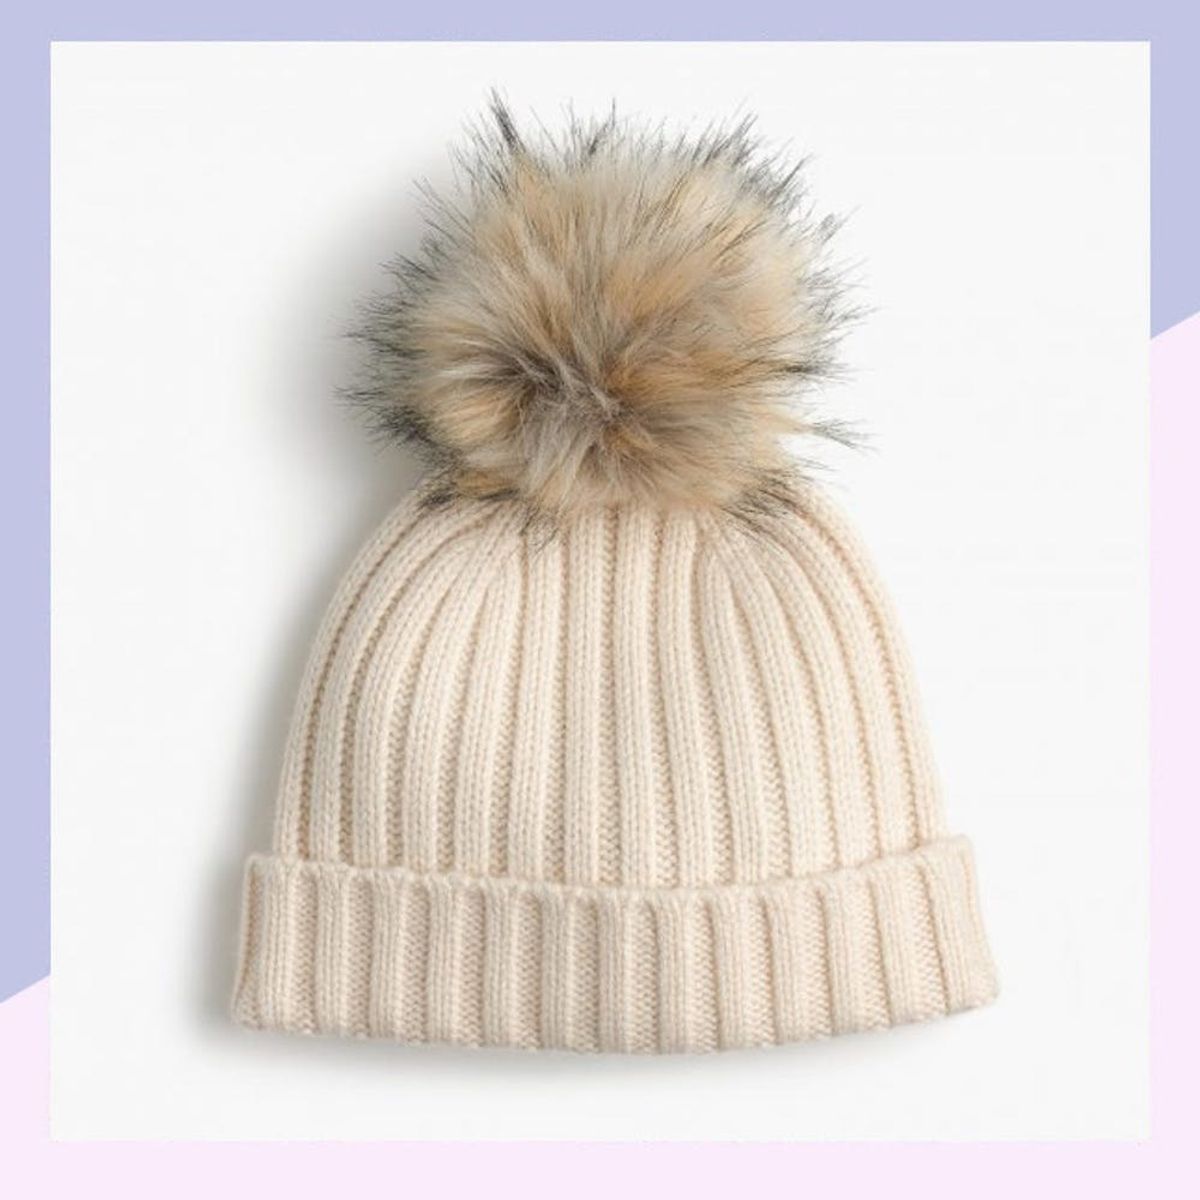 12 Pom-Pom Hats to Keep You Cozy and Cute All Winter Long